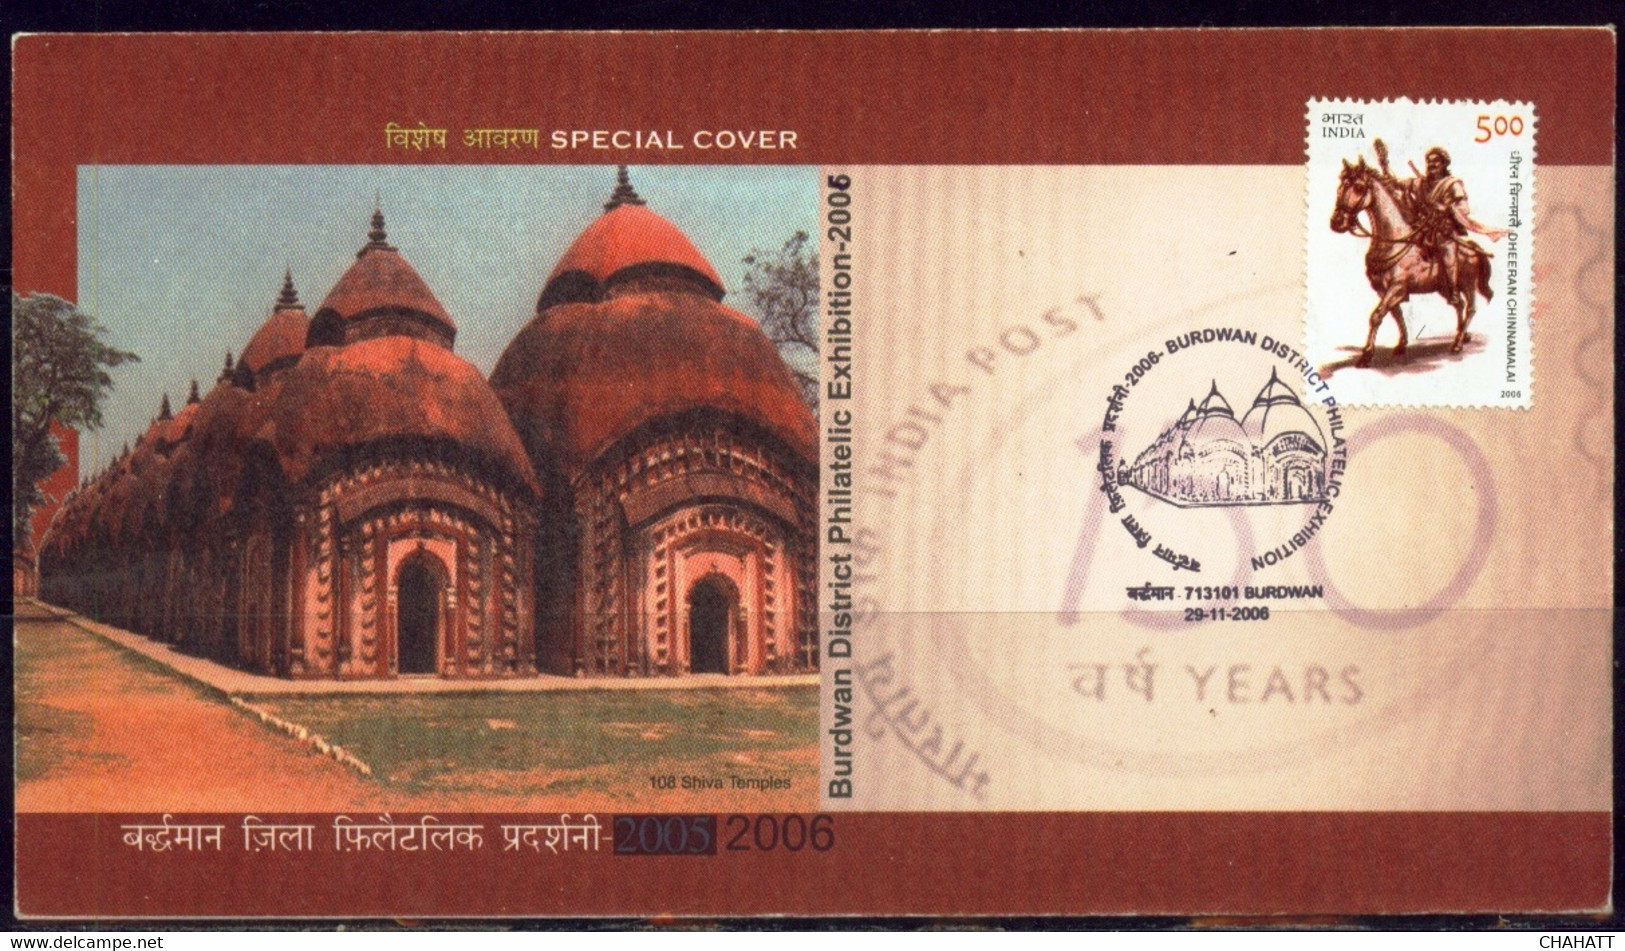 HINDUISM- LORD SHIVA- TERRACOTTA TEMPLE-BURDWAN-SPECIAL COVER- PICTORIAL CANCEL-USED-INDIA-2006-BX3-41 - Hindouisme